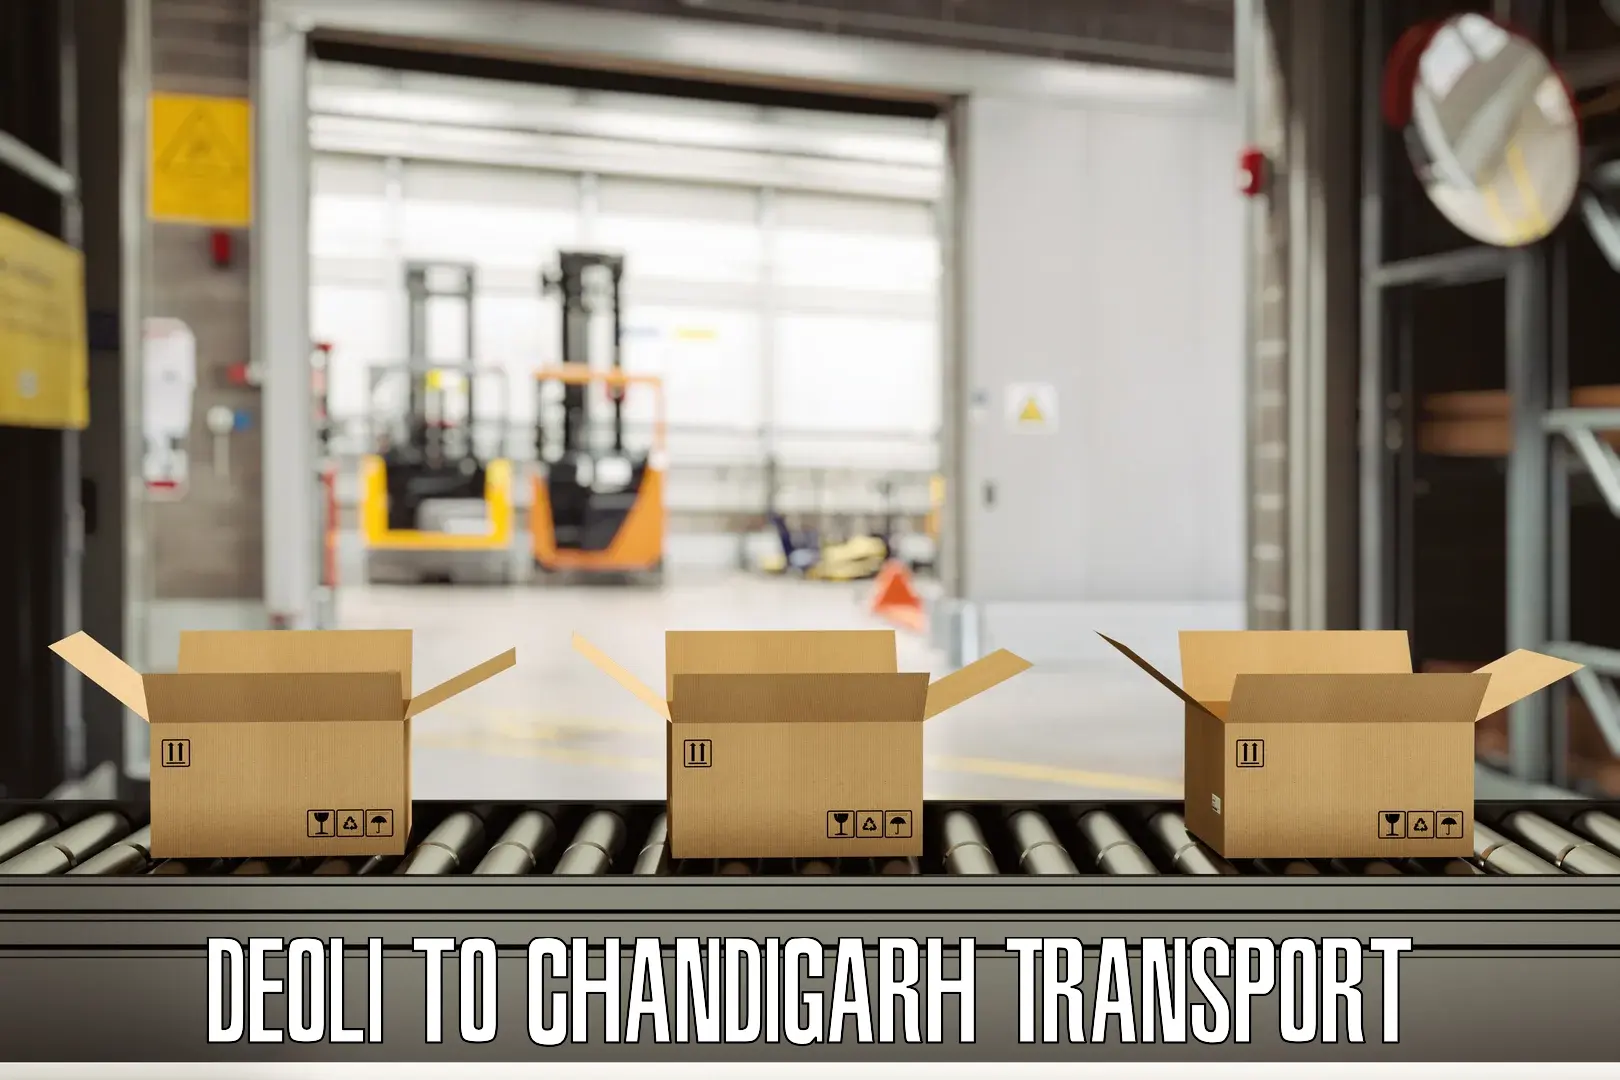 Transport bike from one state to another Deoli to Chandigarh